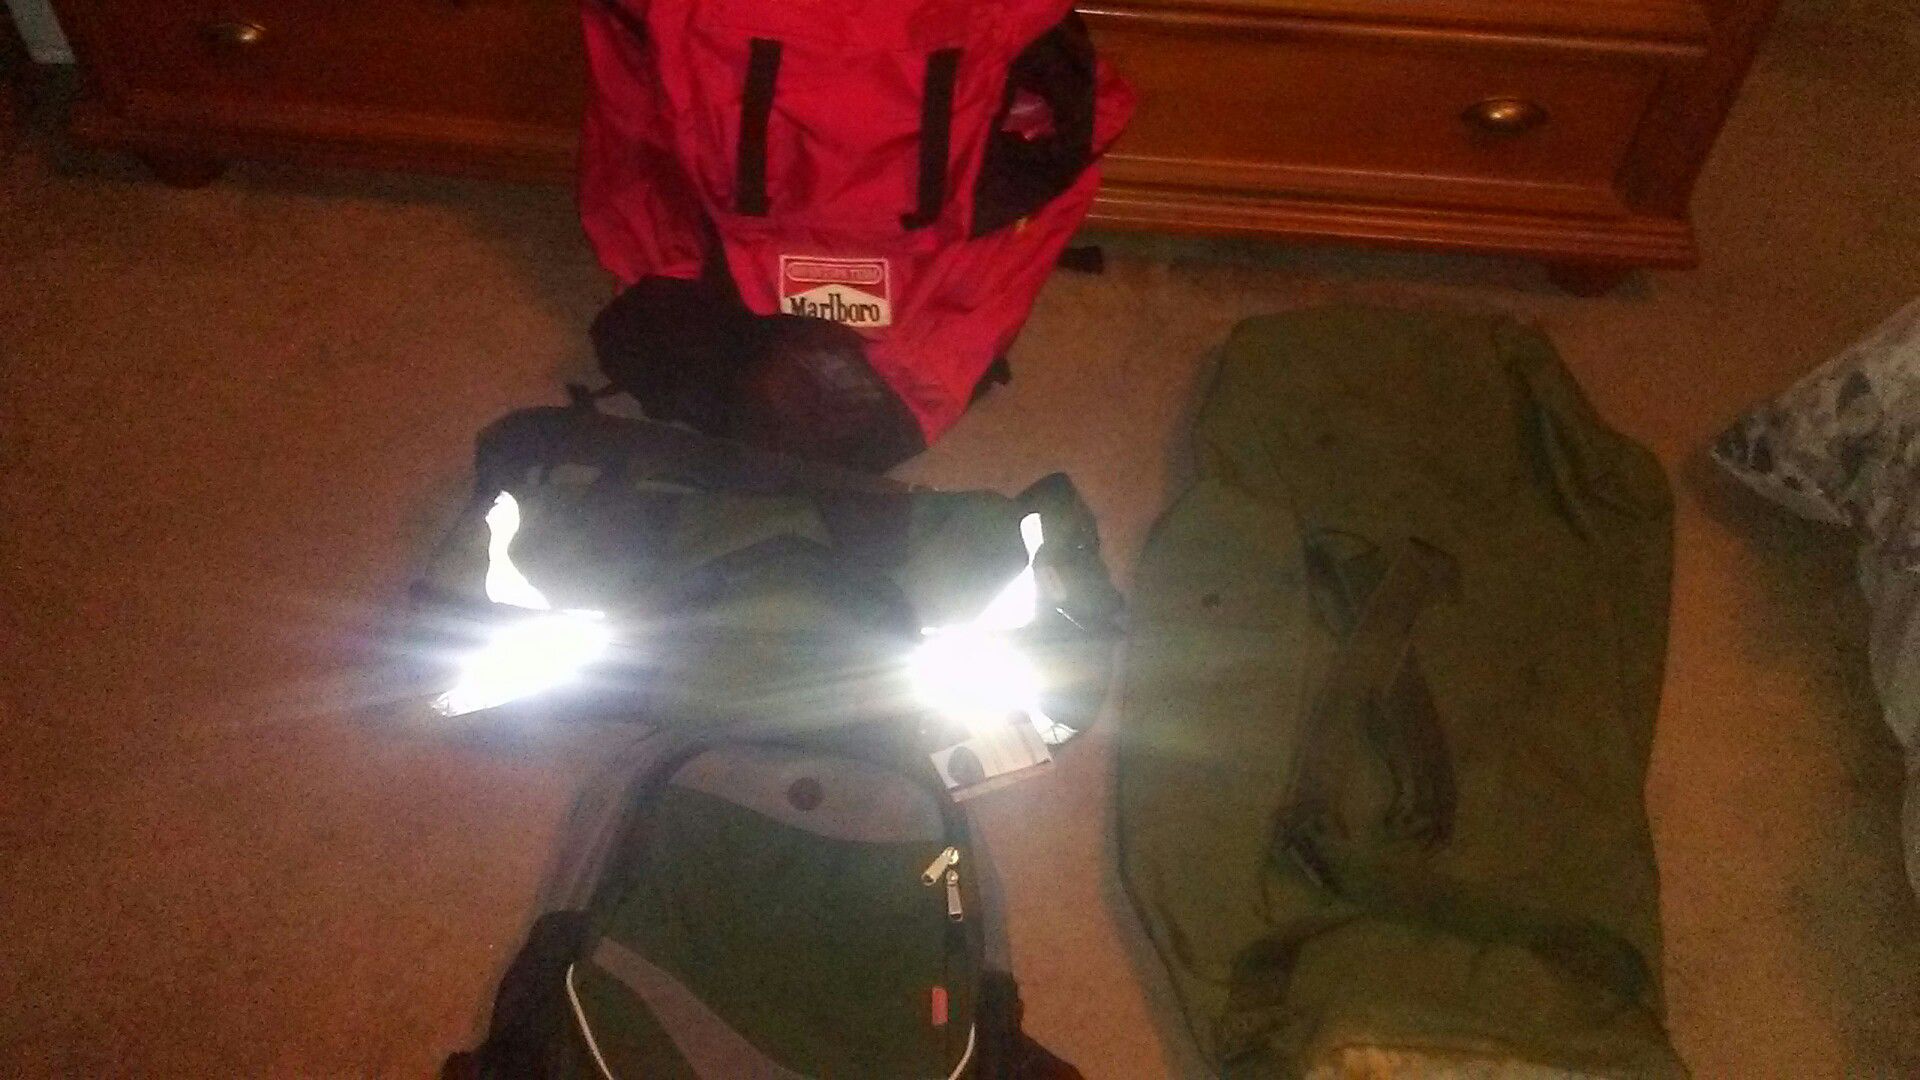 One extra large Marlboro backpack , one green backpack, one green athletic bag, large army duffle bag .